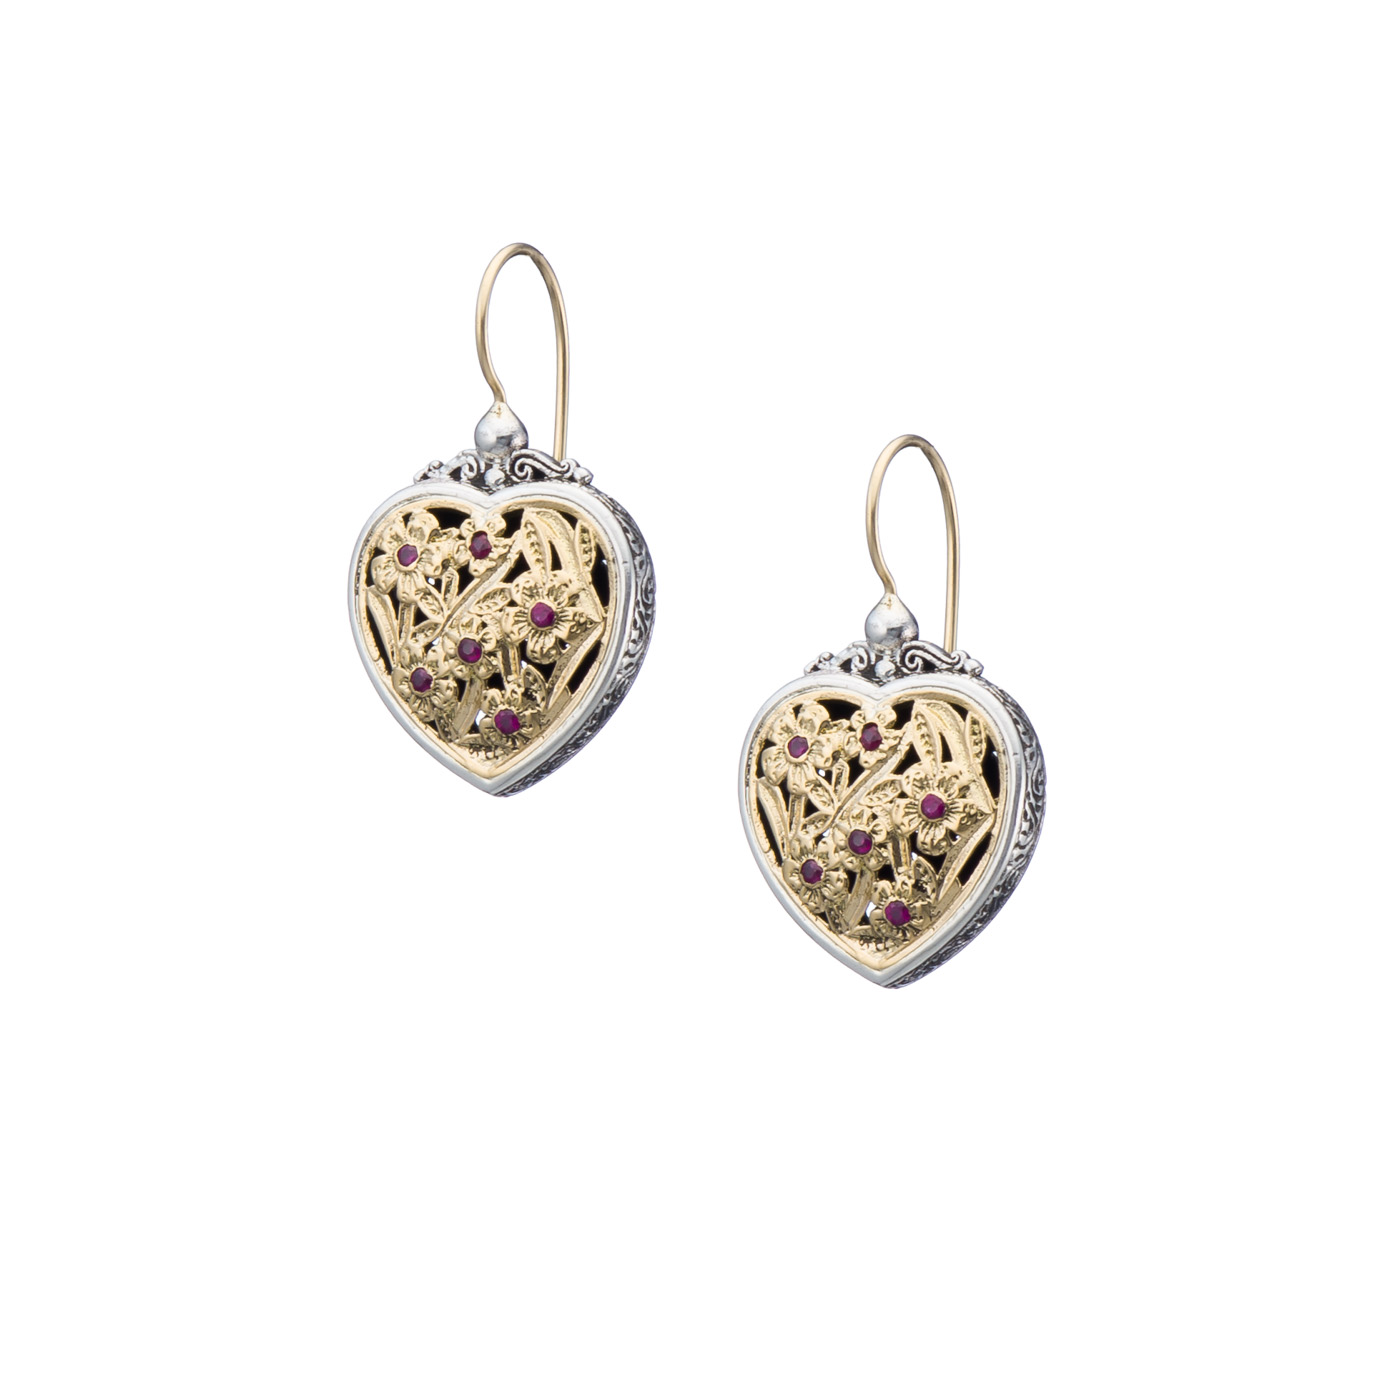 Harmony Heart earrings in 18K Gold and Sterling silver with rubies